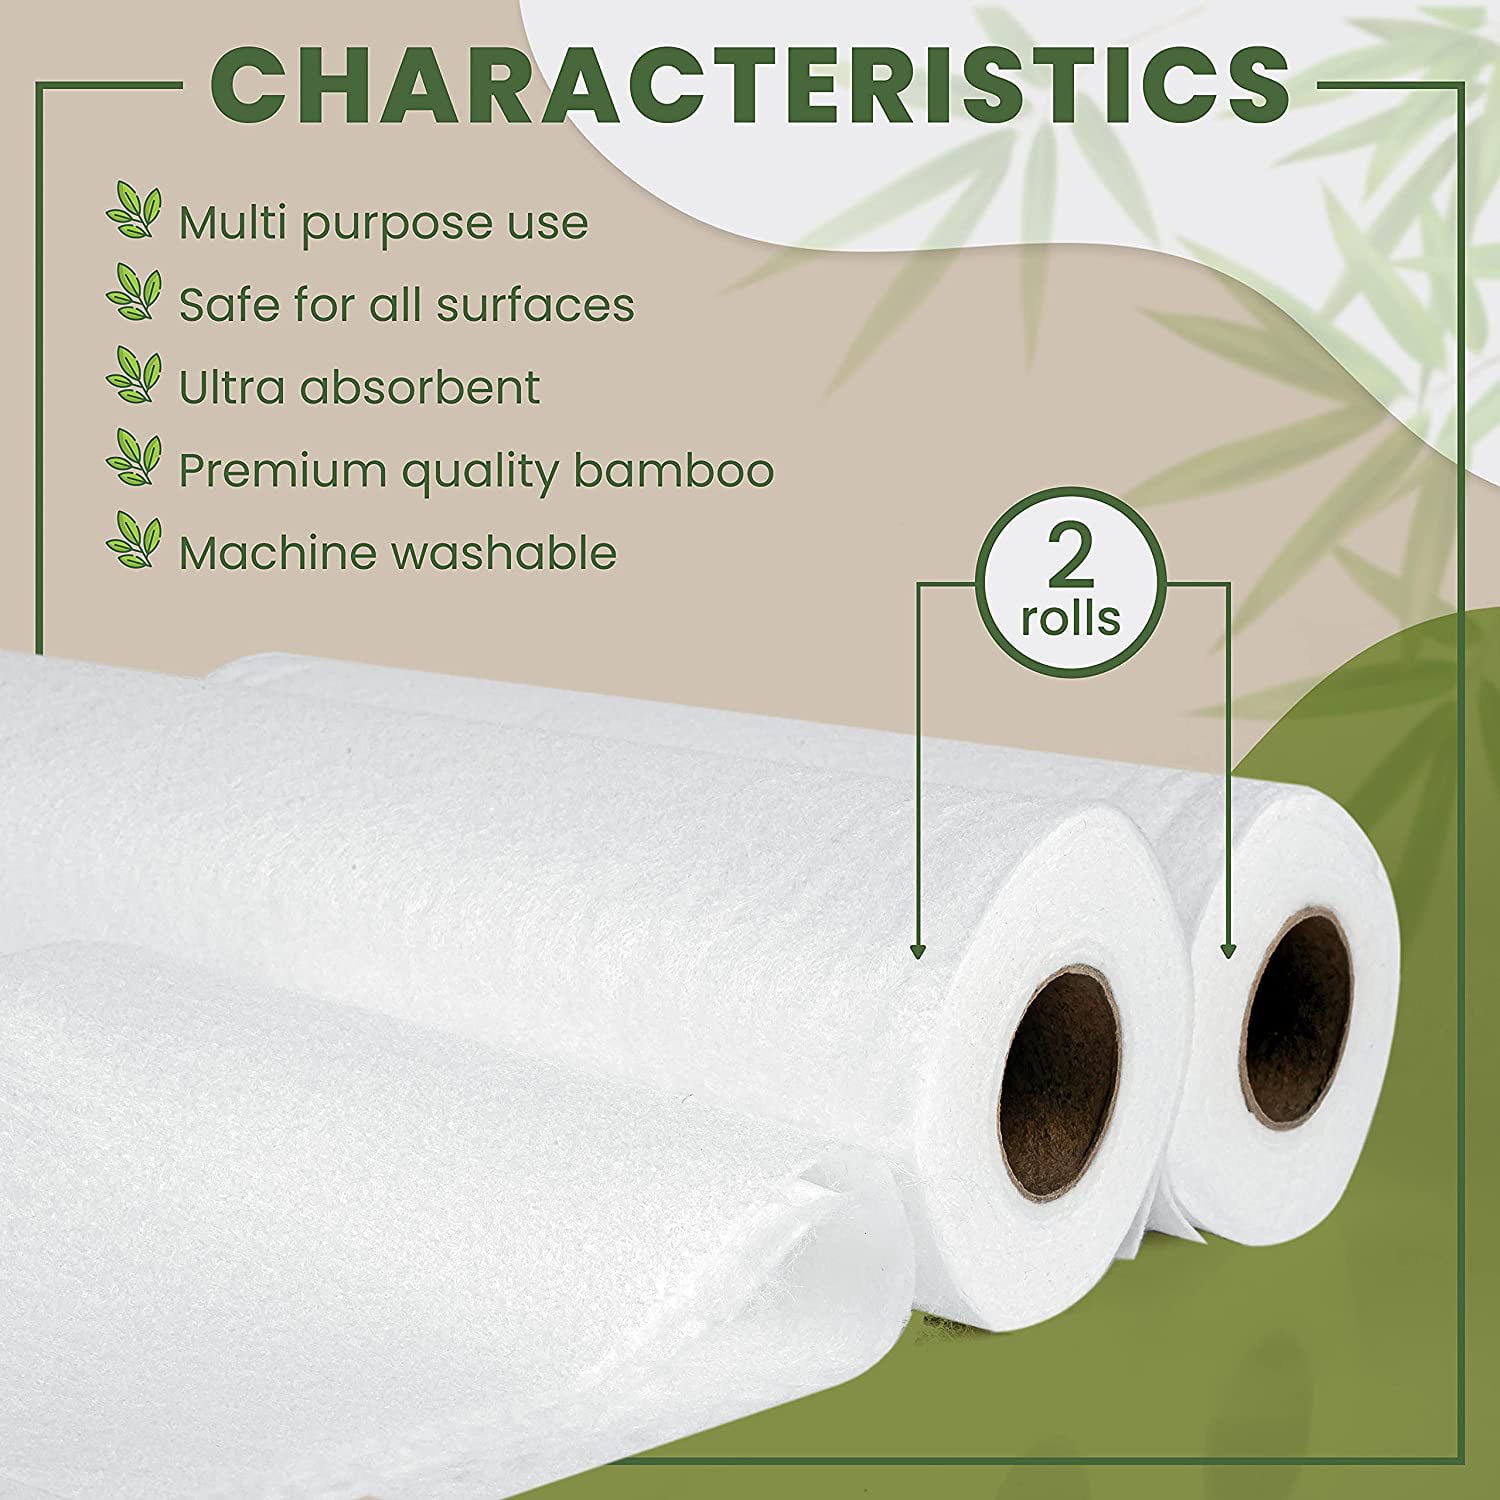 GLOSCLEAN Bamboo Rayon Reusable Towels | Reusable Paper Towels 2 Rolls. Eco  Friendly & Plastic Free Towel for Home and Kitchen Cleaning